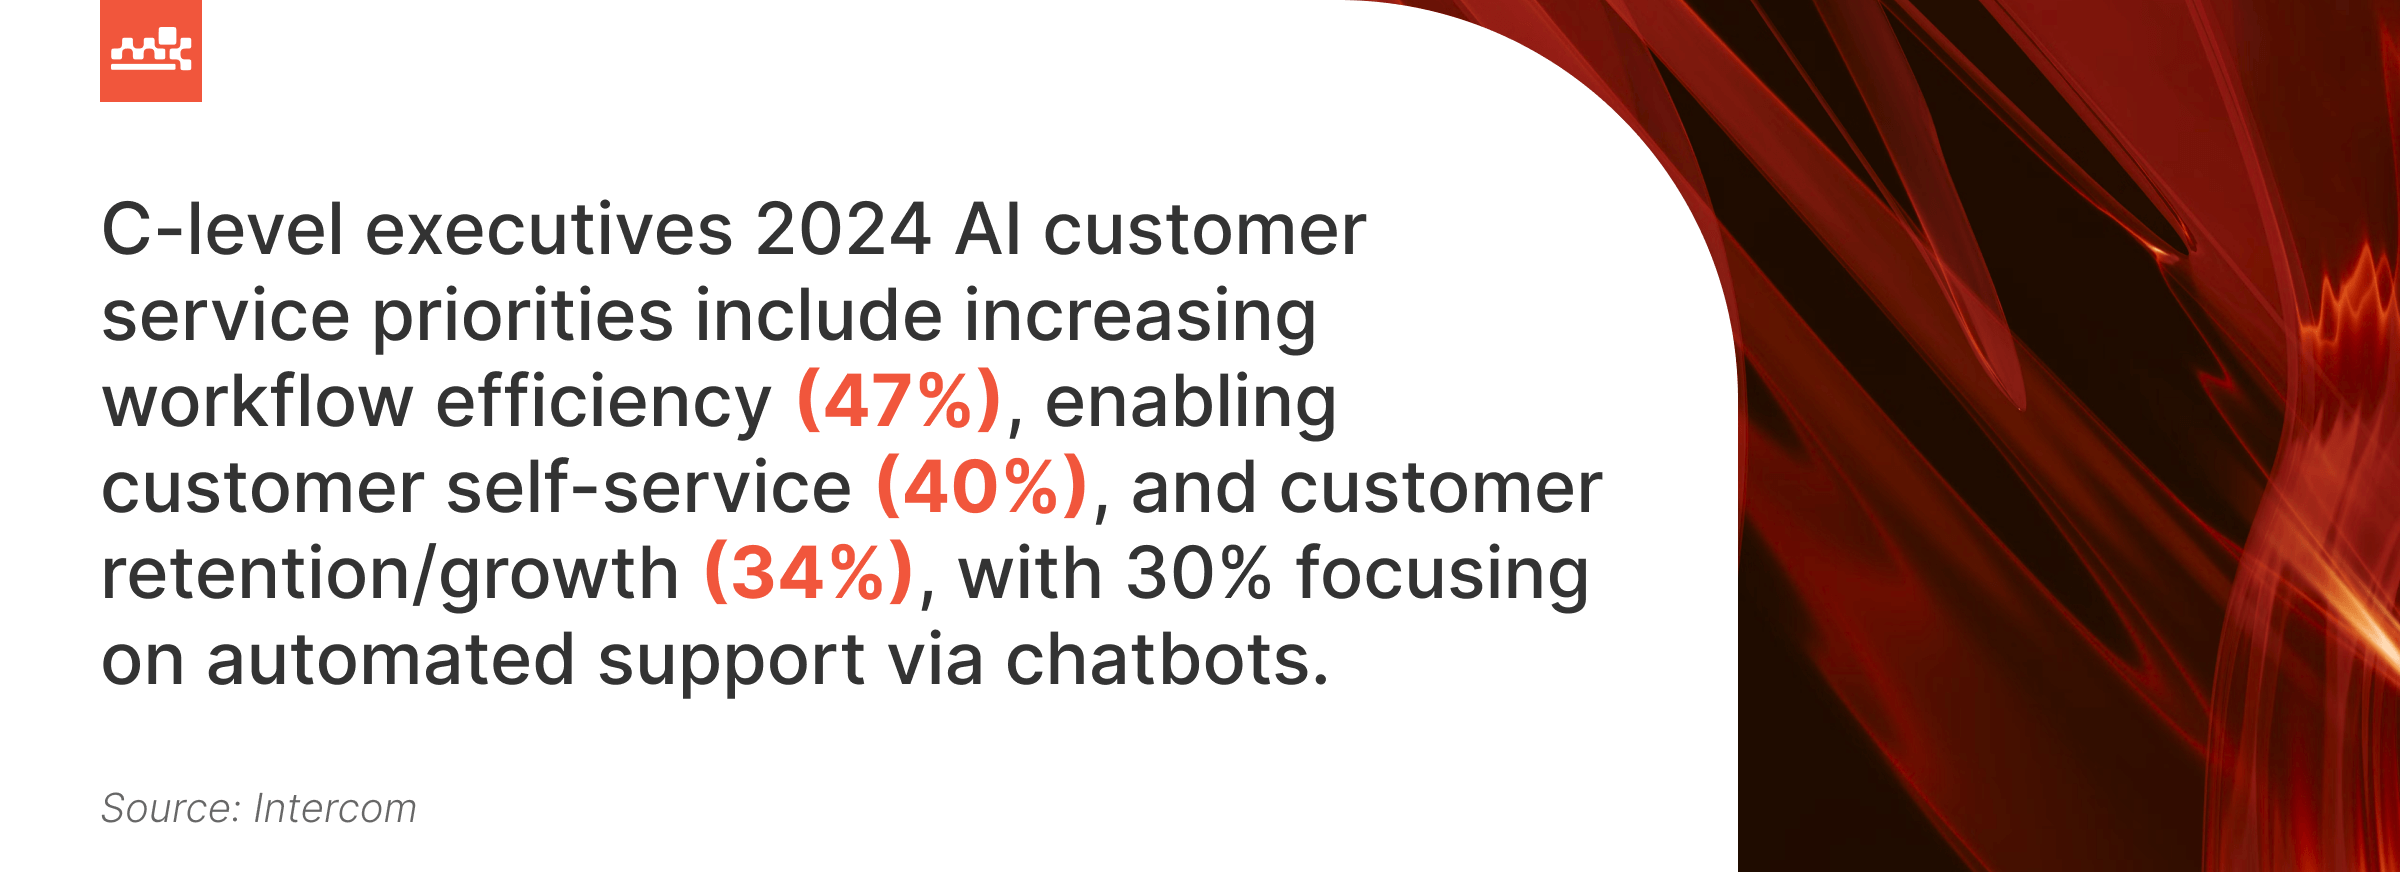 AI Customer Service Priorities for 2024